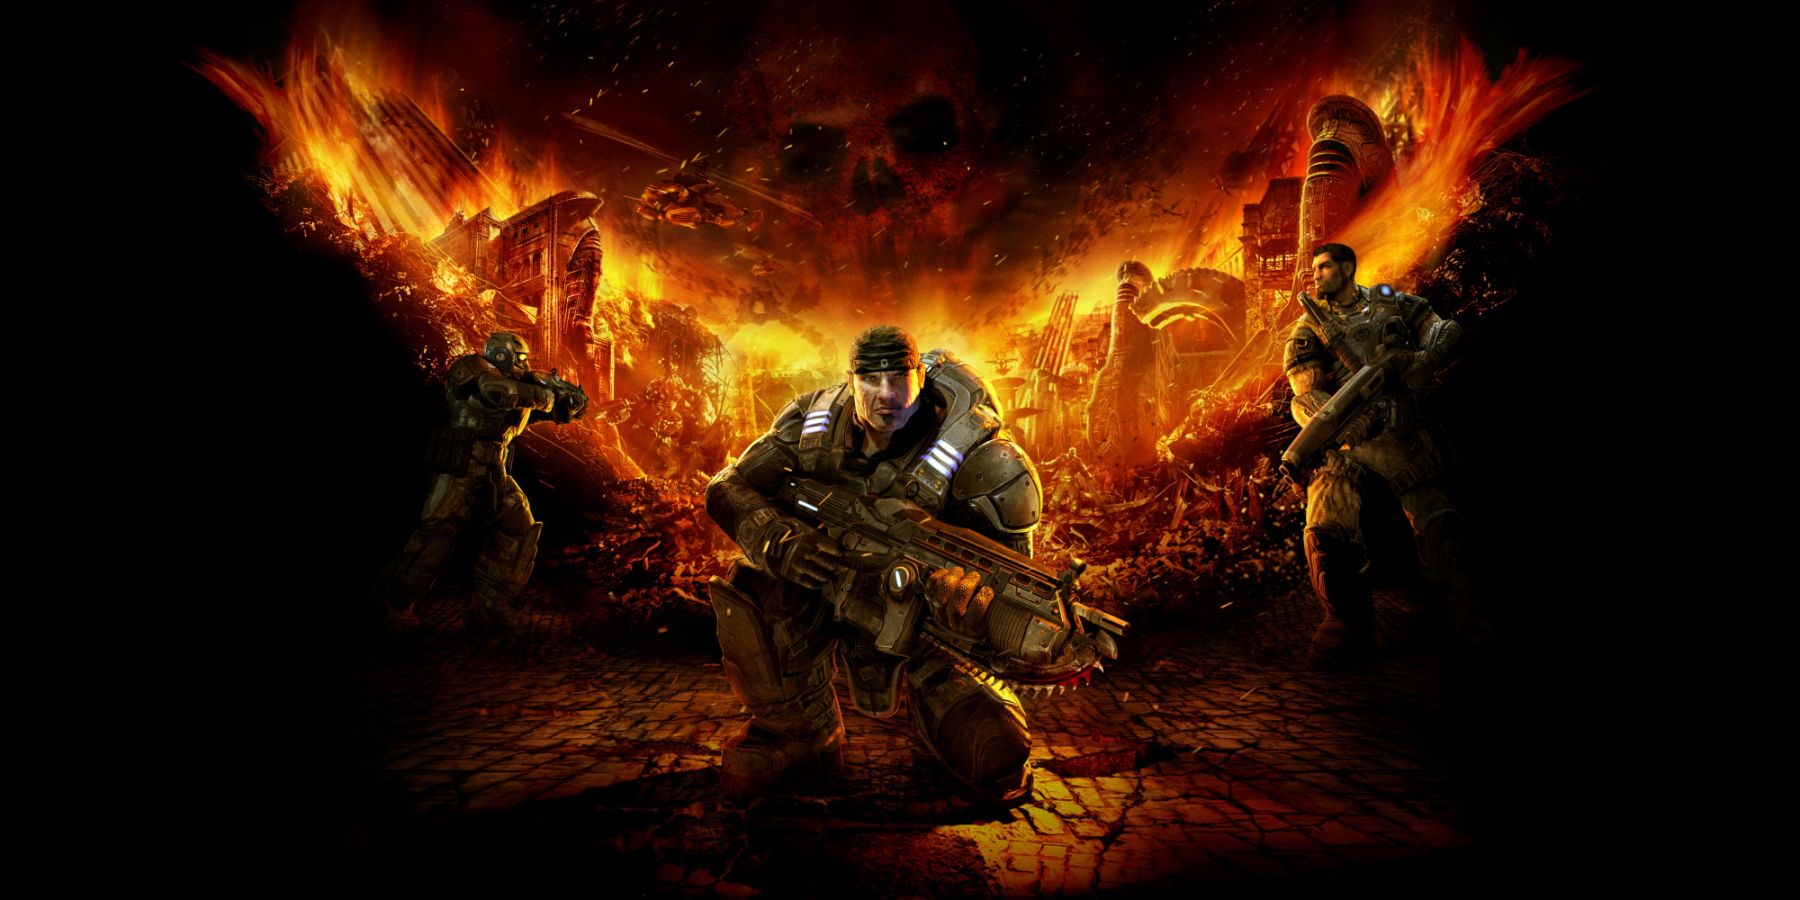 The key art for Gears of War 1, depicting Marcus Fenix and other soldiers in front of a fiery city landscape.